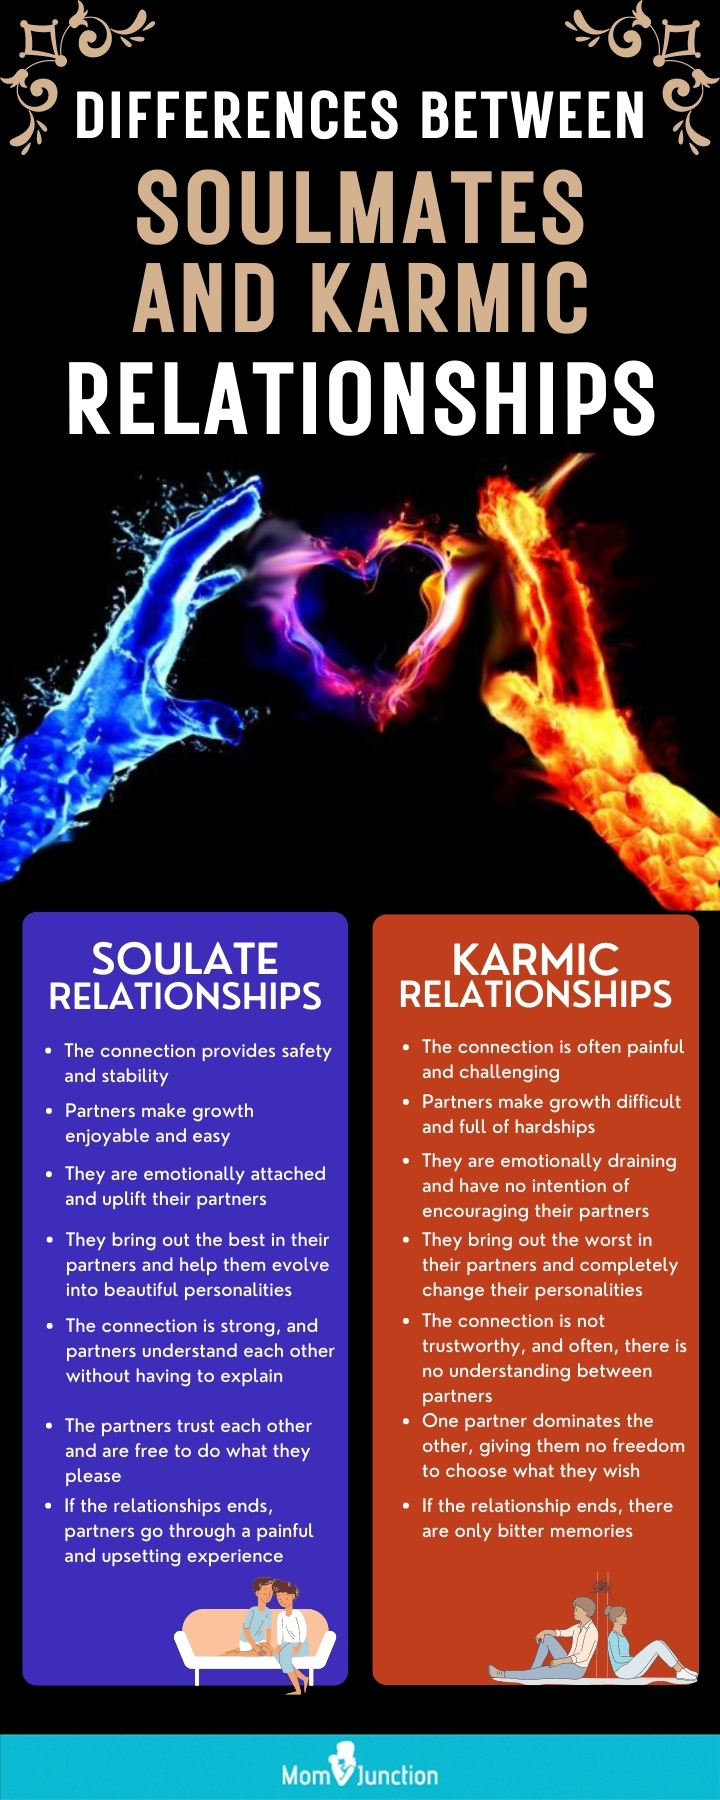 Differences between soulmates and karmic relationship [infographic]